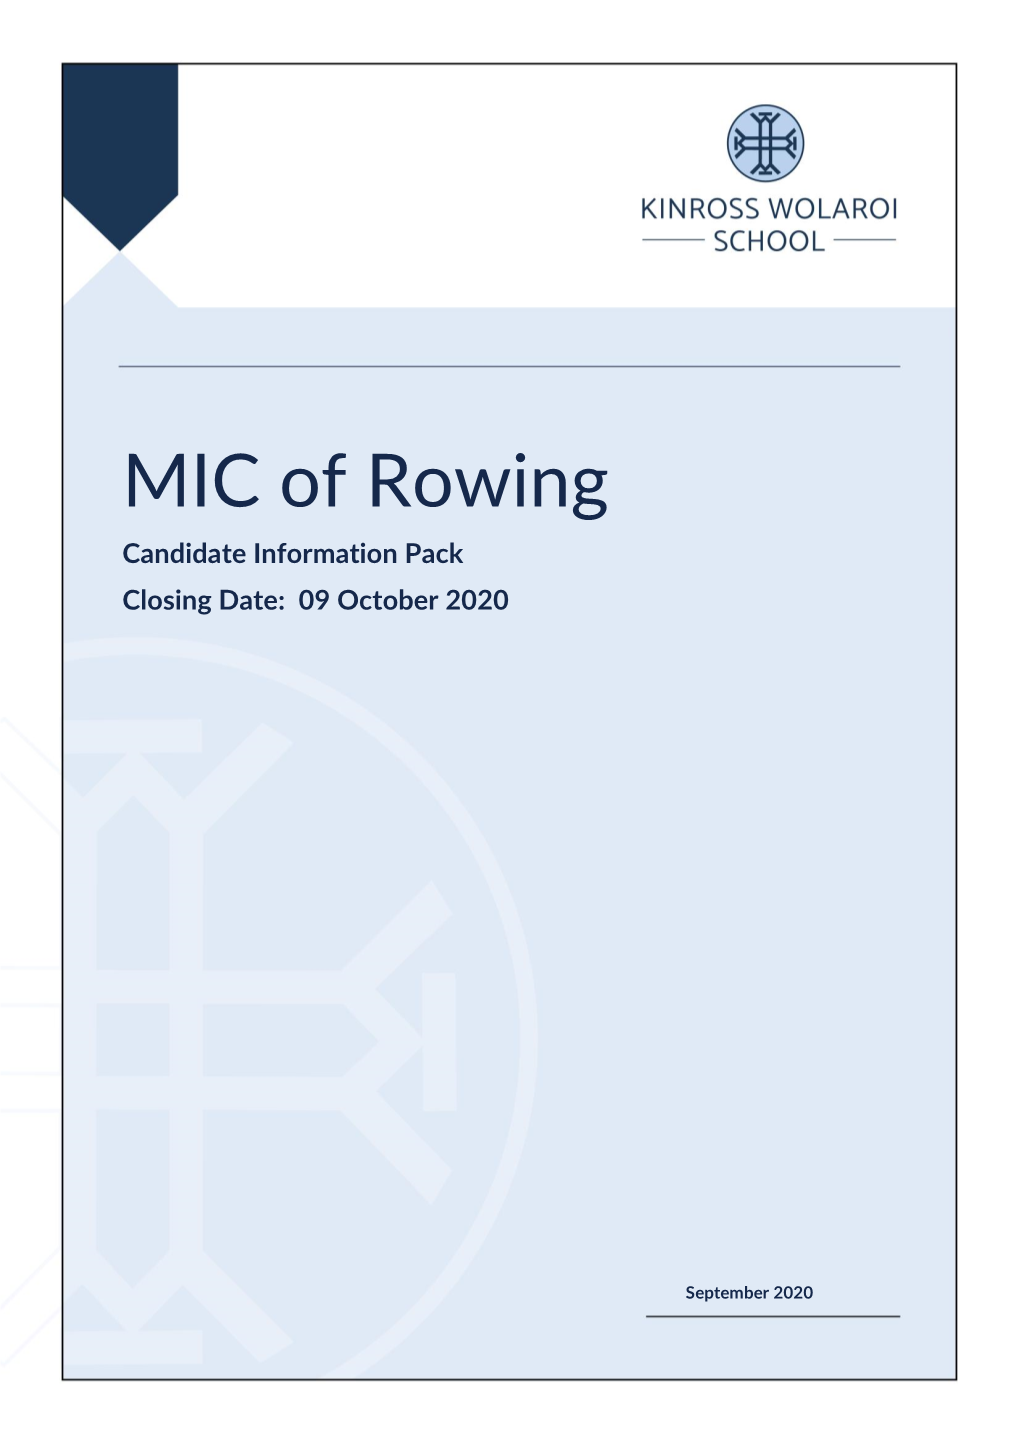 MIC of Rowing Candidate Information Pack Closing Date: 09 October 2020